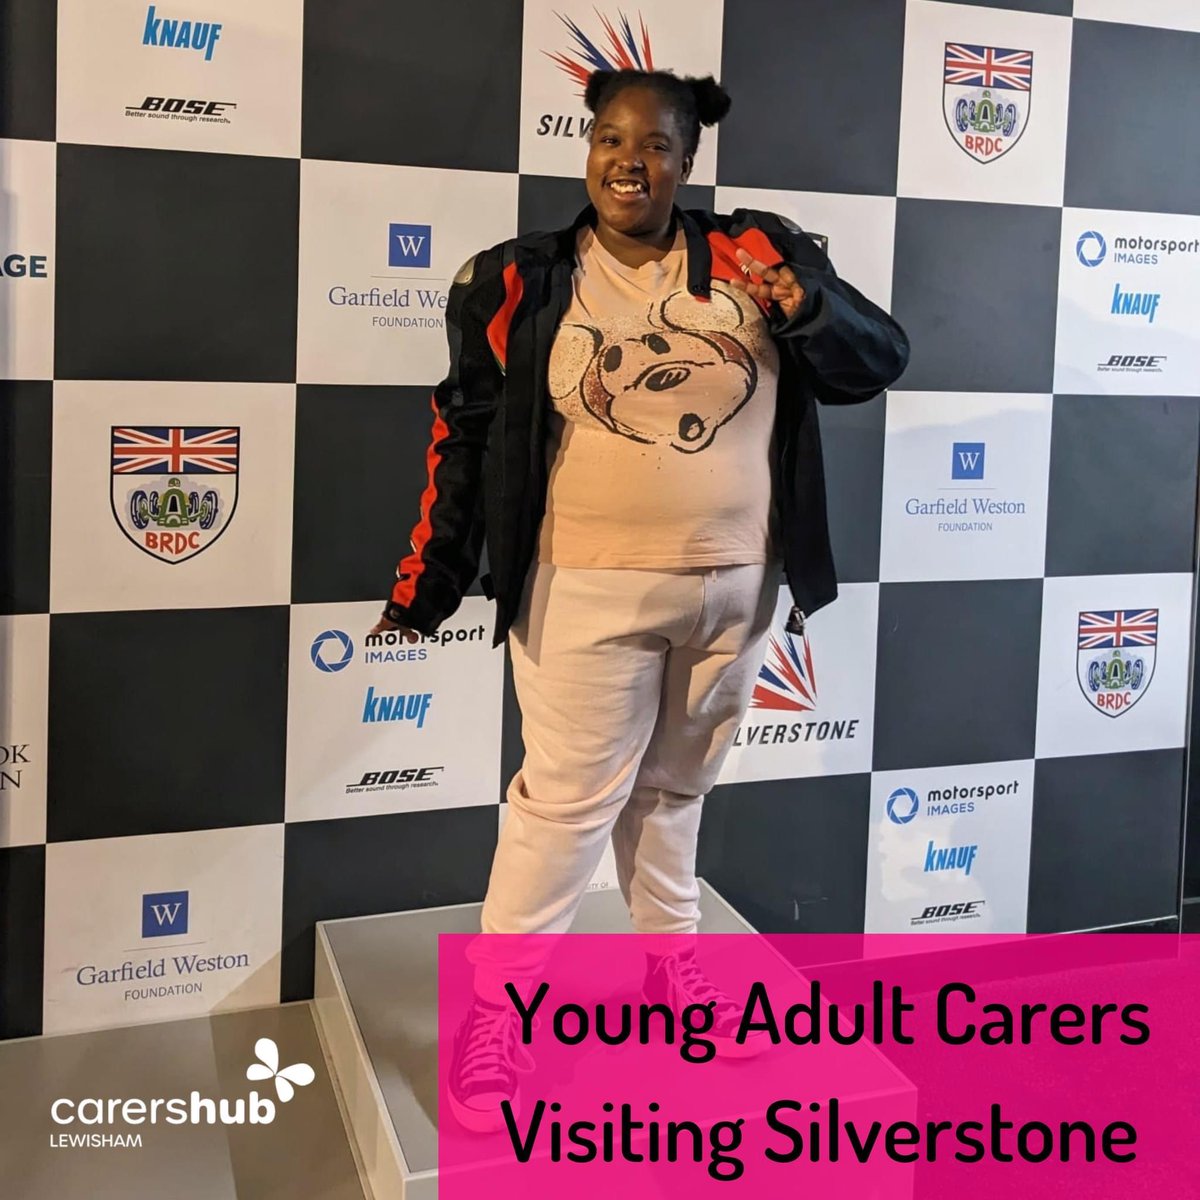 Here is Blessin (aged 17 years), standing on a replica of the podium that Lewis Hamilton and other F1 drivers have stood on to celebrate their wins!
The YAC enjoyed taking a break from caring and relaxing with friends as many have to juggle caring school work .
#youngadultcarer